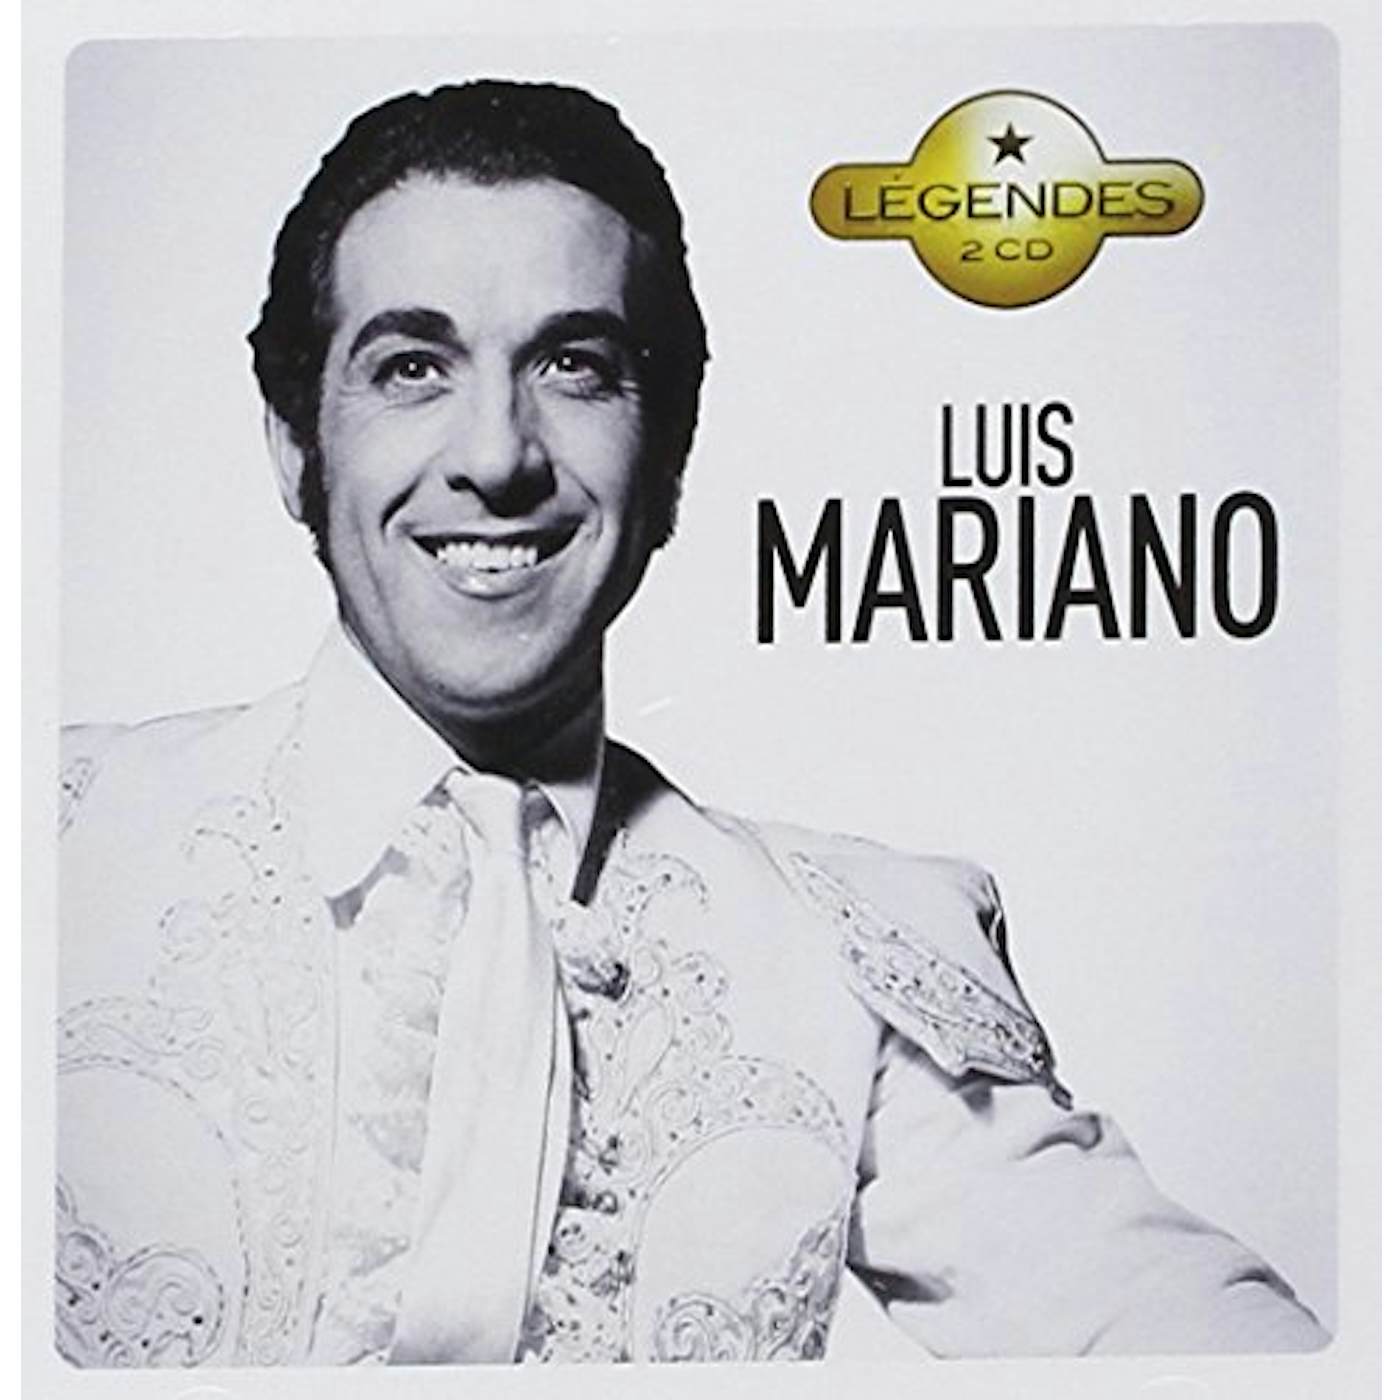 LUIS MARIANO CD